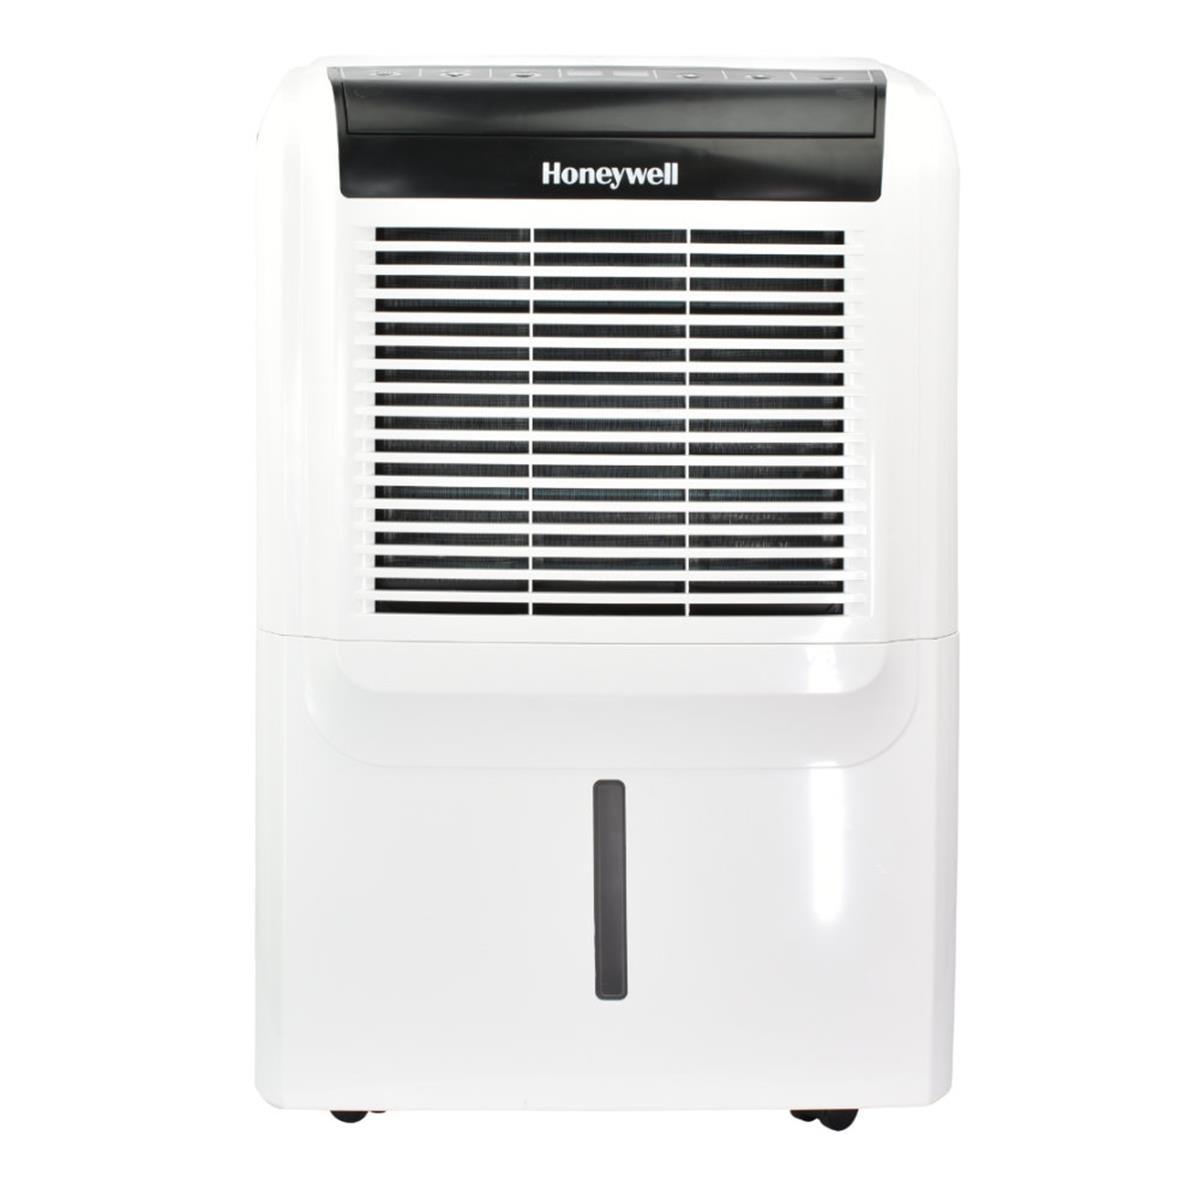 Picture of Honeywell DH45PWKN 45 PintPortable Dehumidifier with Pump